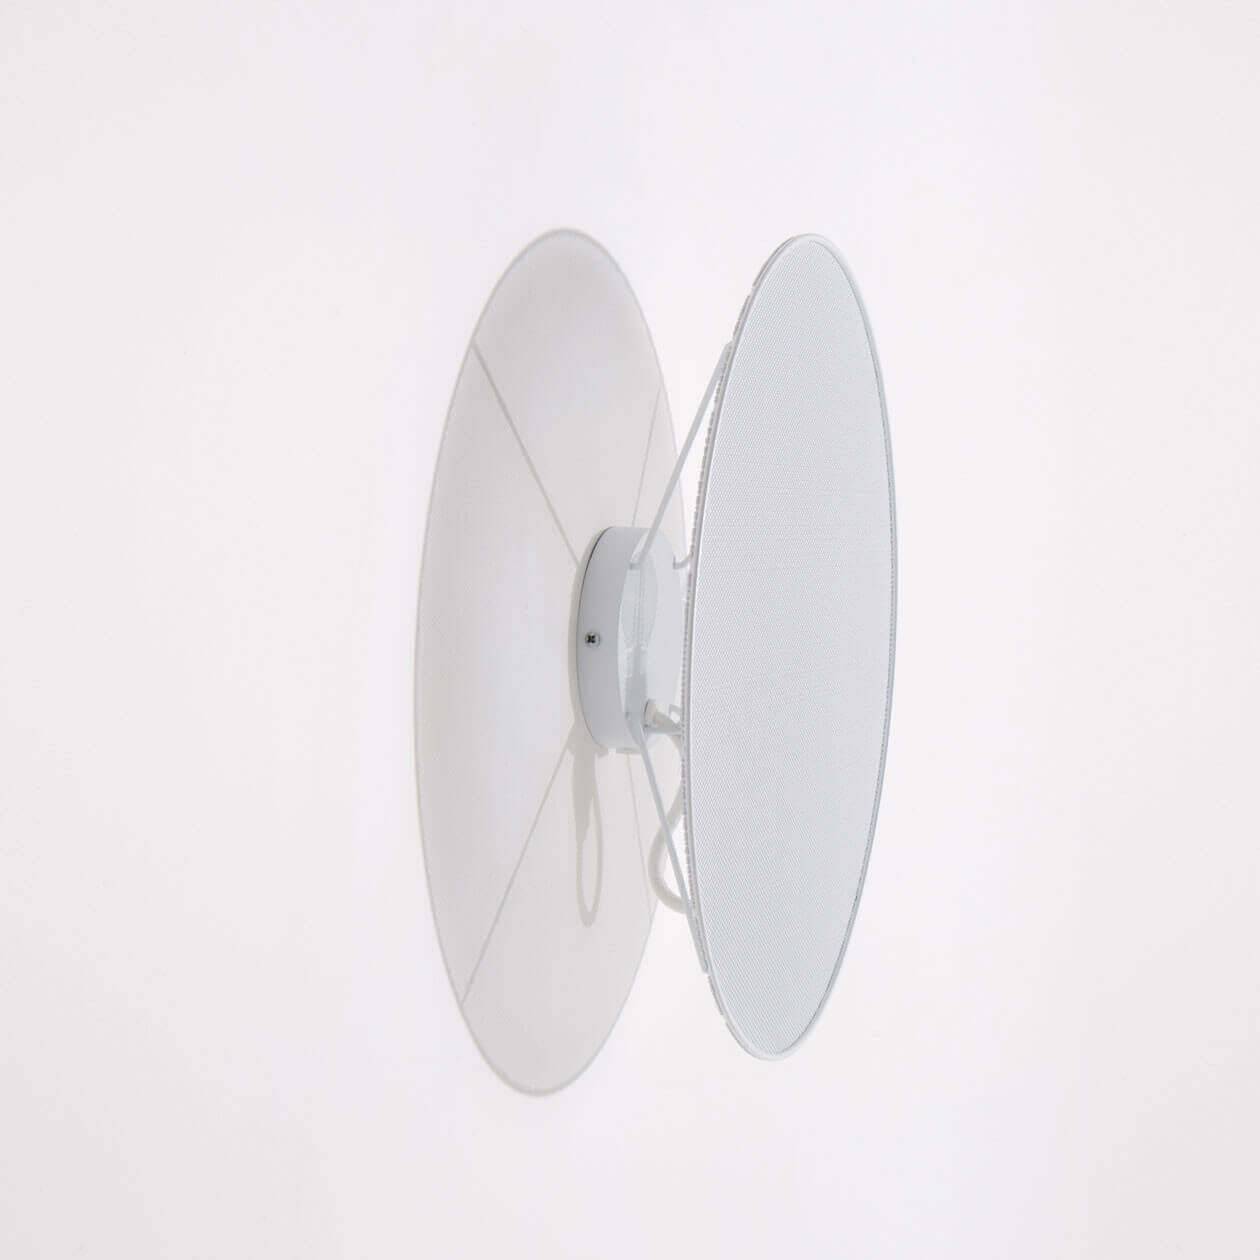 modern-wall-lamp-without-cable-large-grillo-white-elise-fouin